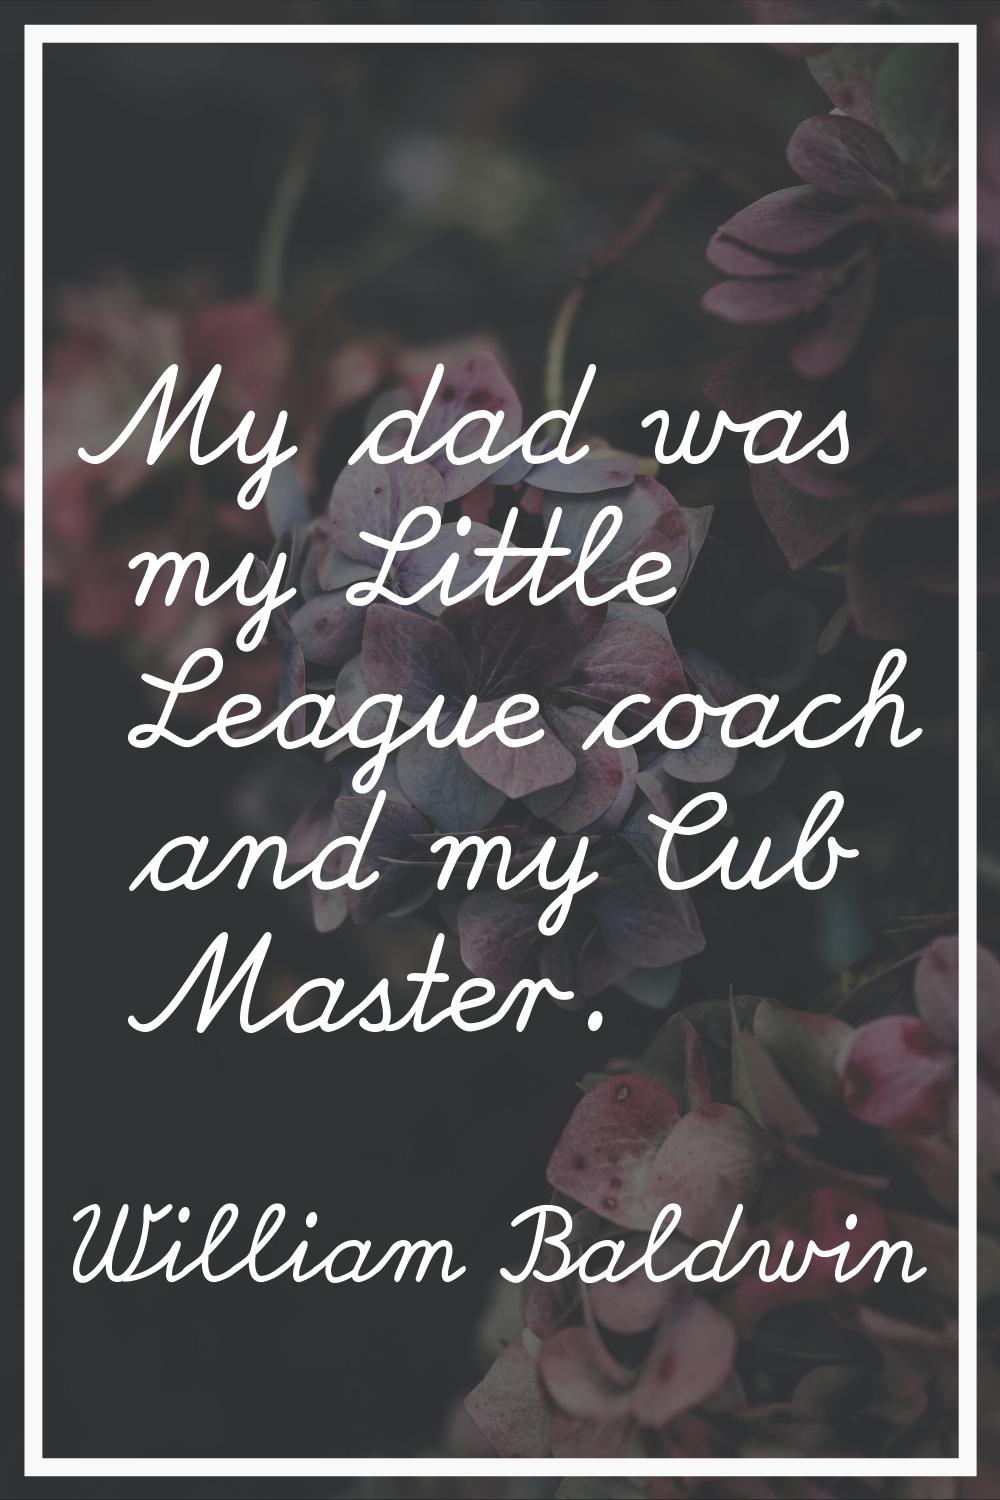 My dad was my Little League coach and my Cub Master.